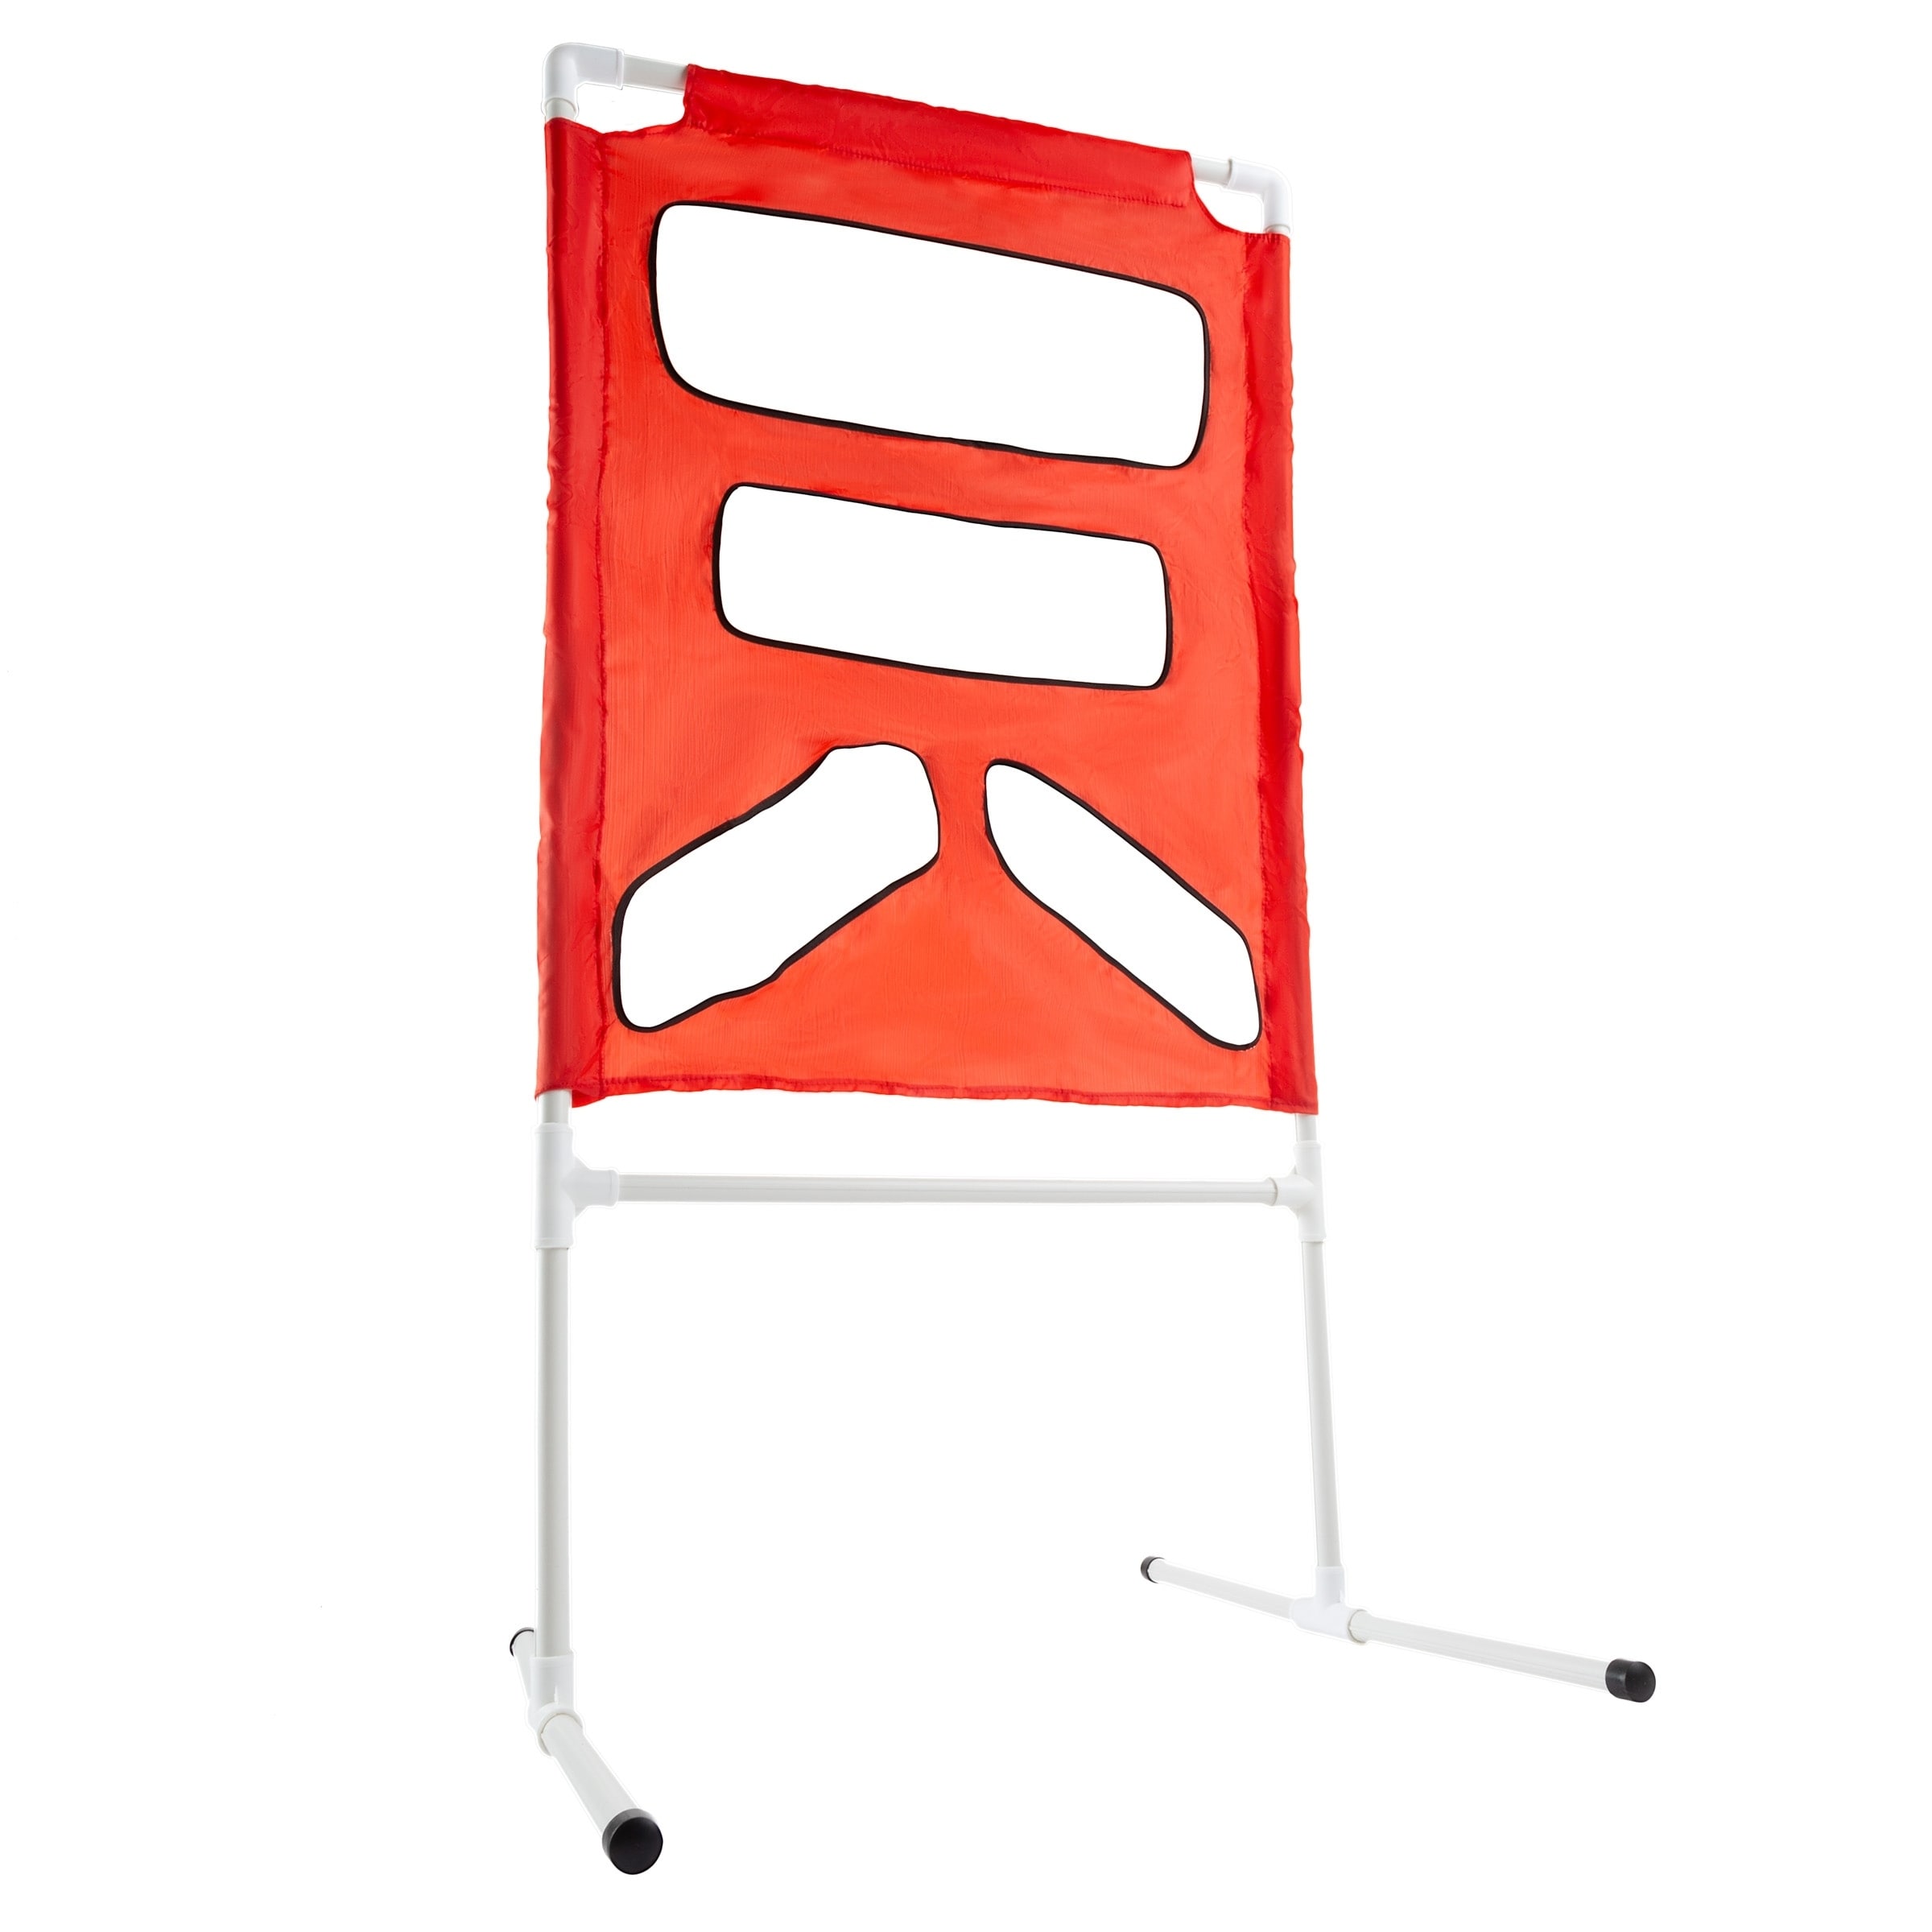 target collapsible table